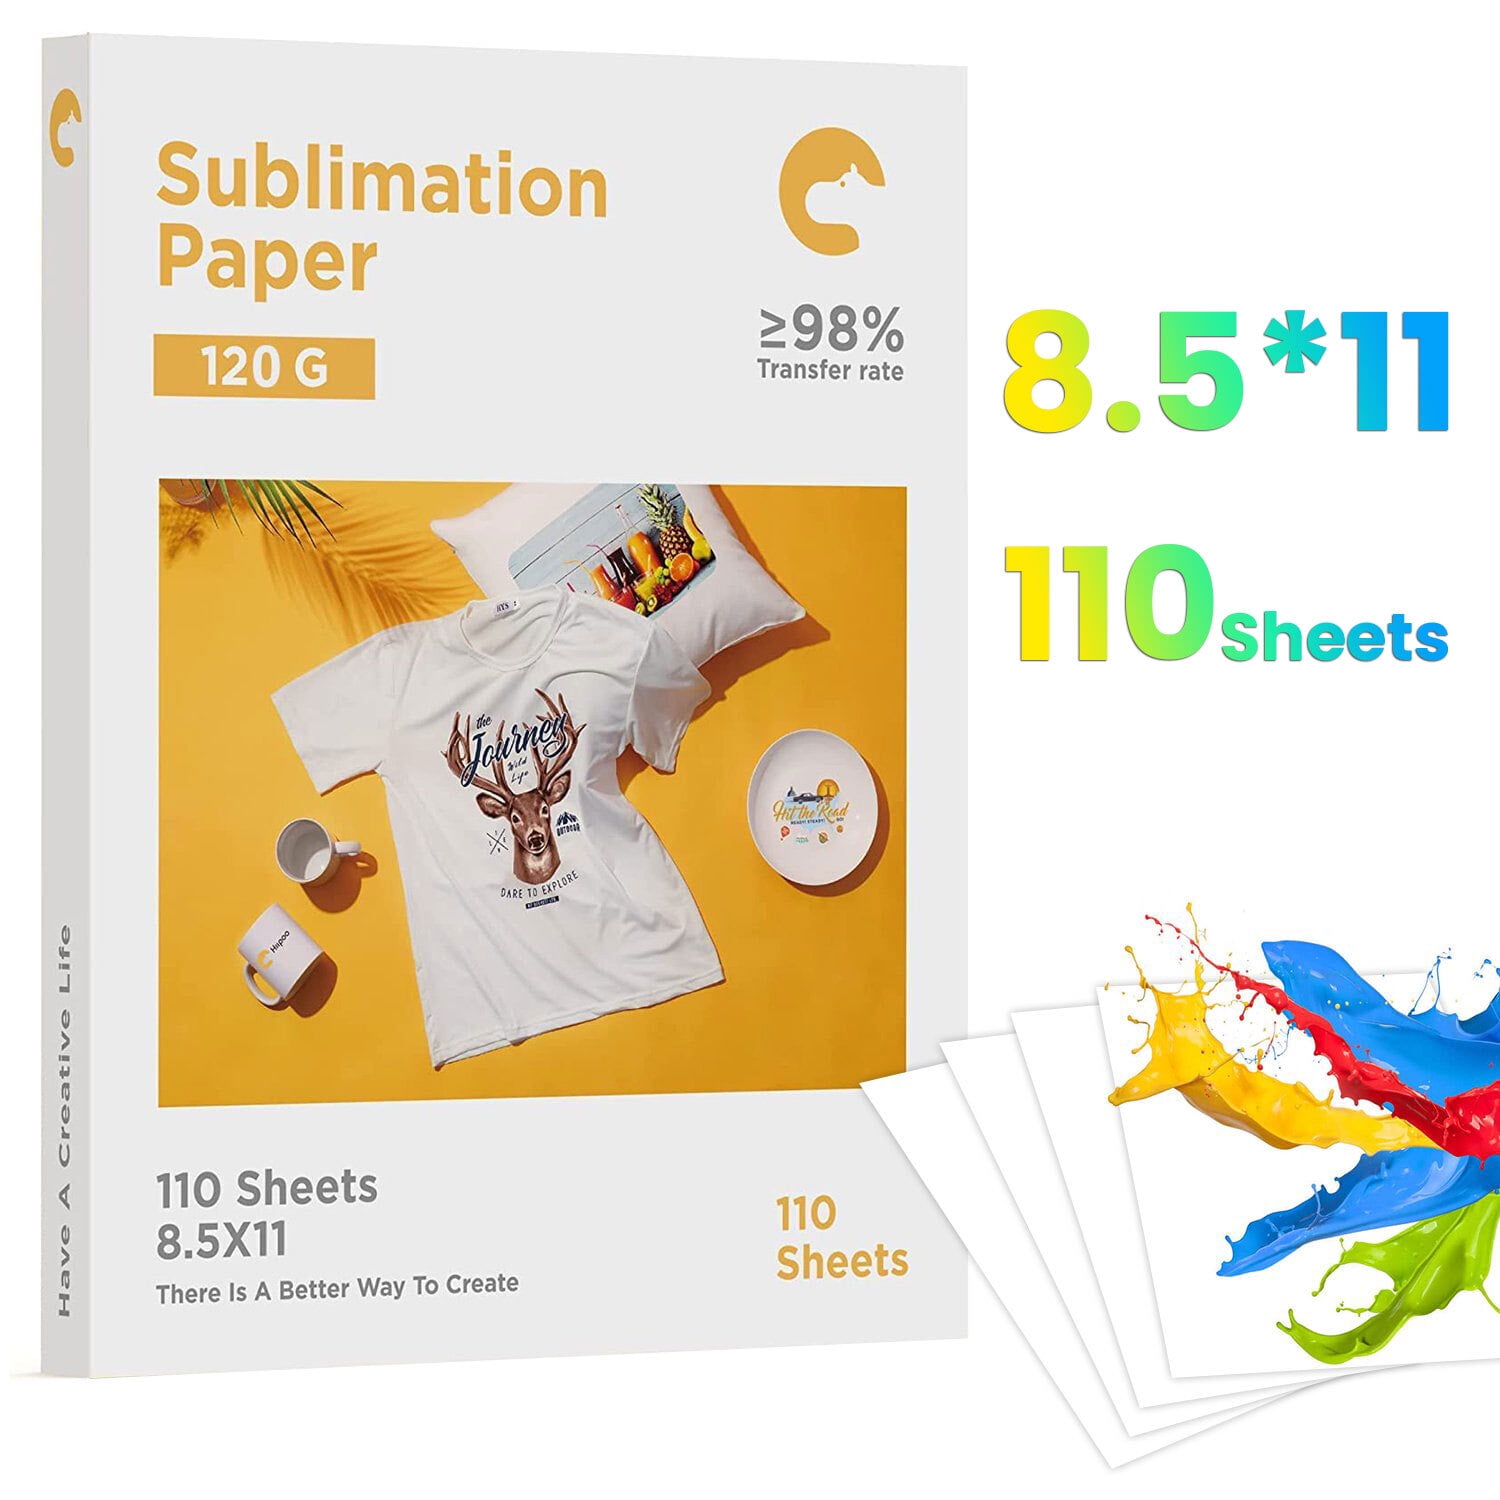 Hiipoo Sublimation Paper 8.5x11 inch 110 Sheets for Any Inkjet Printer which Match Sublimation Ink 120gsm,Over 98% High Transfer Rate,DIY Print Tools